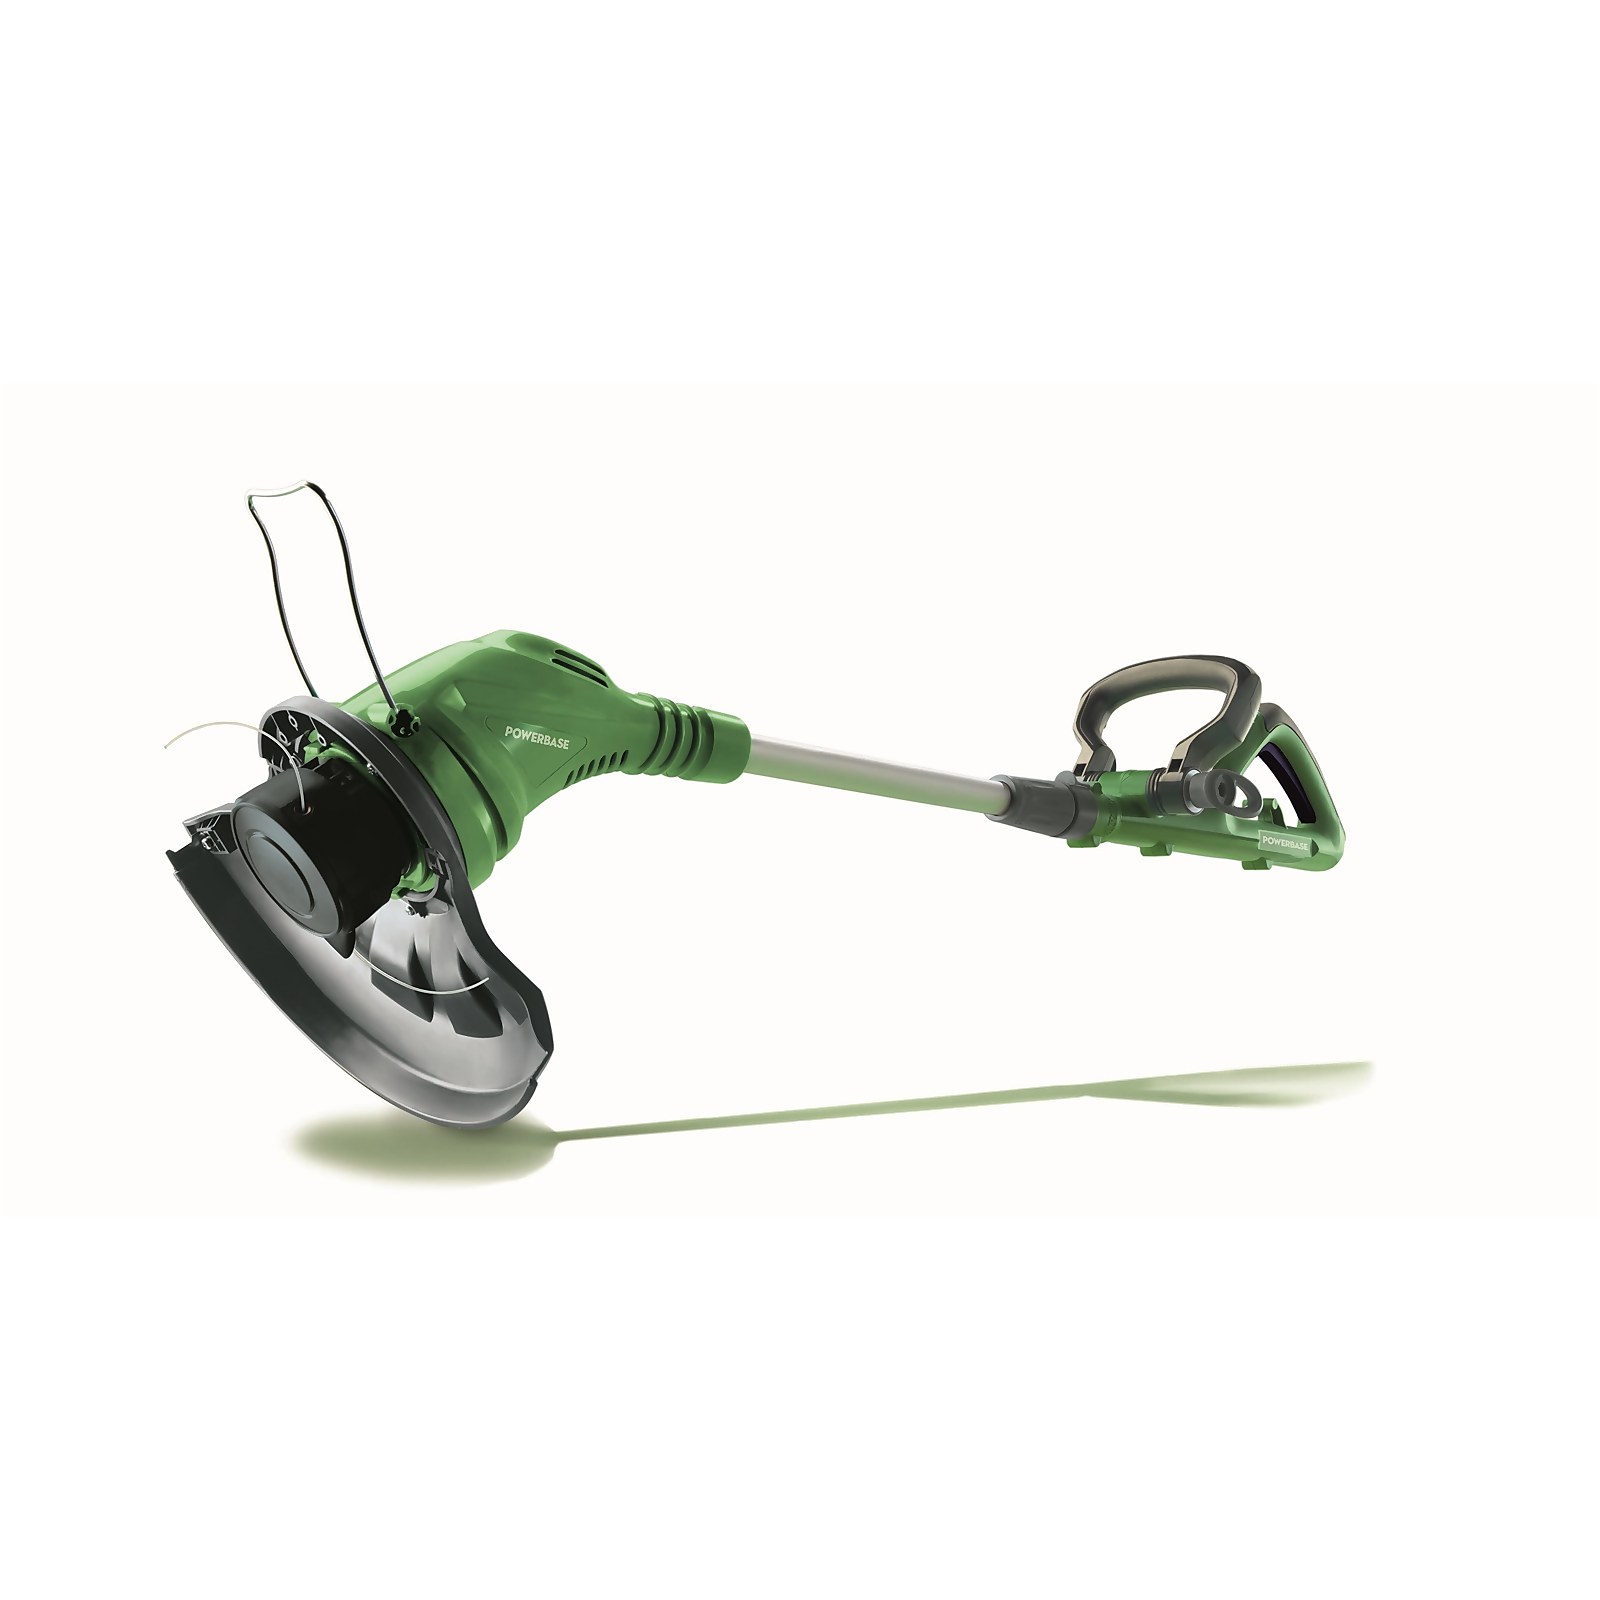 Photo of Powerbase 450w Electric Grass Trimmer - 30cm